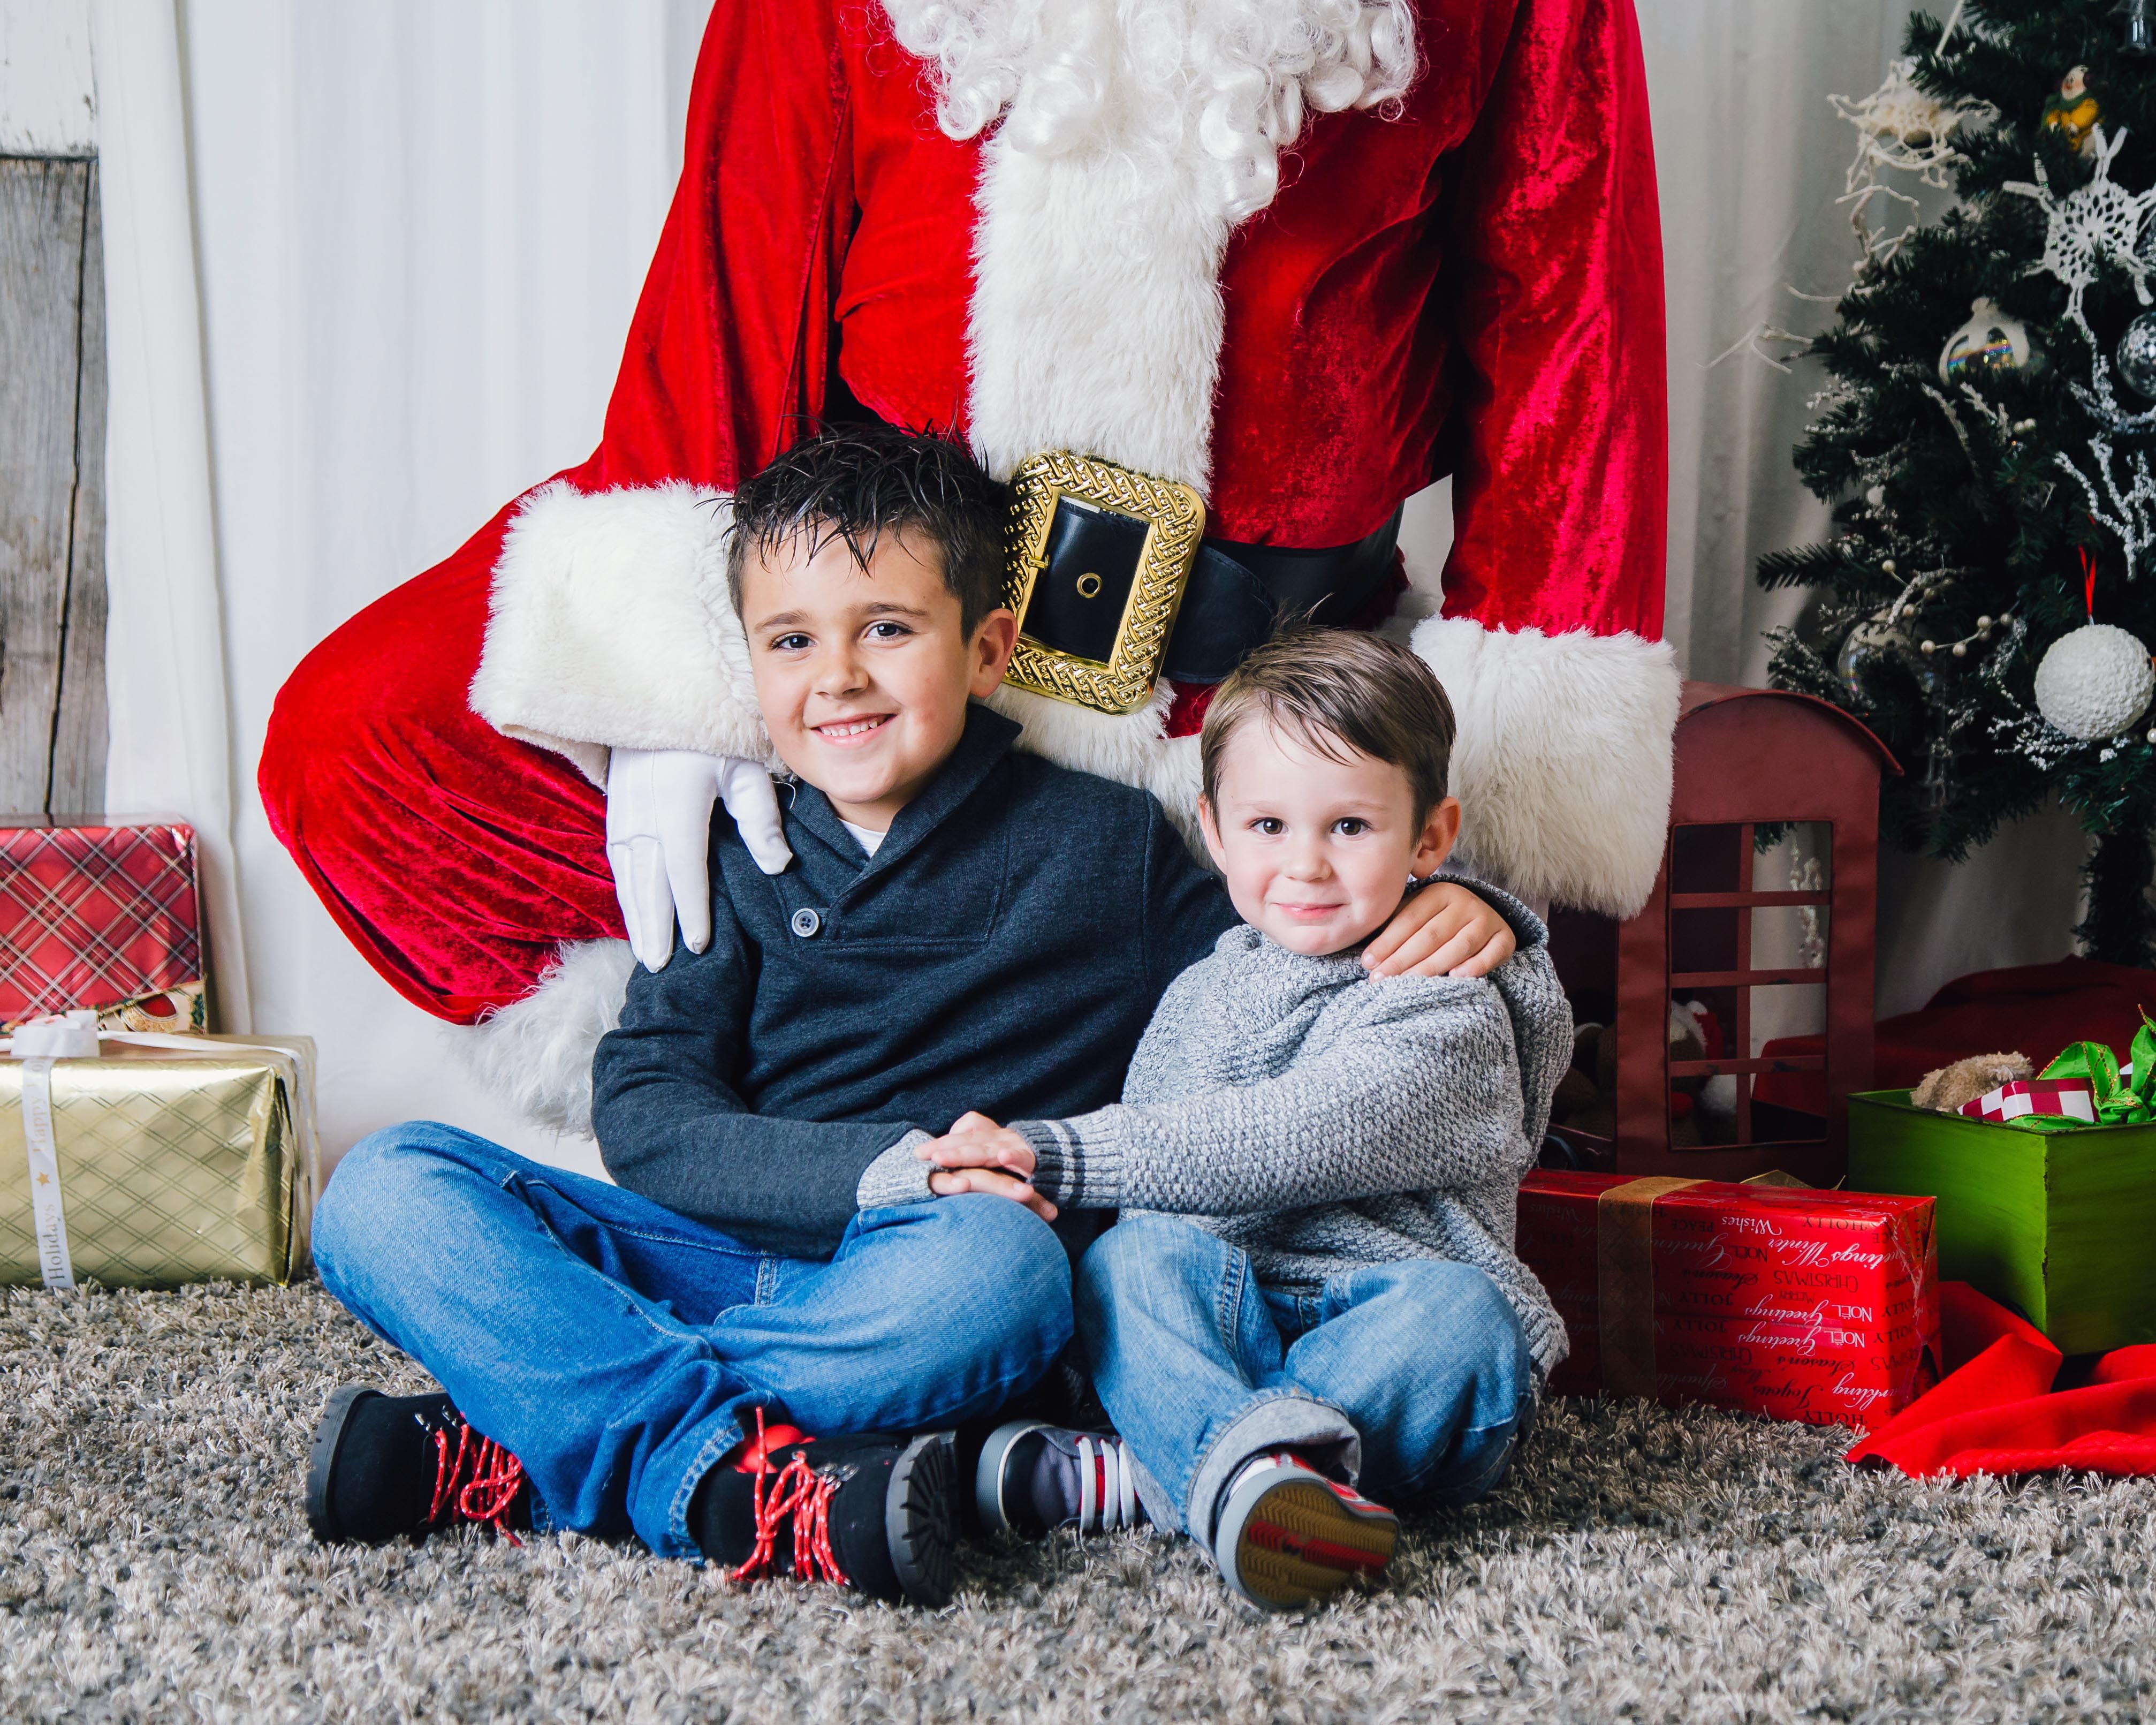 Levi and brother on Santa's lap